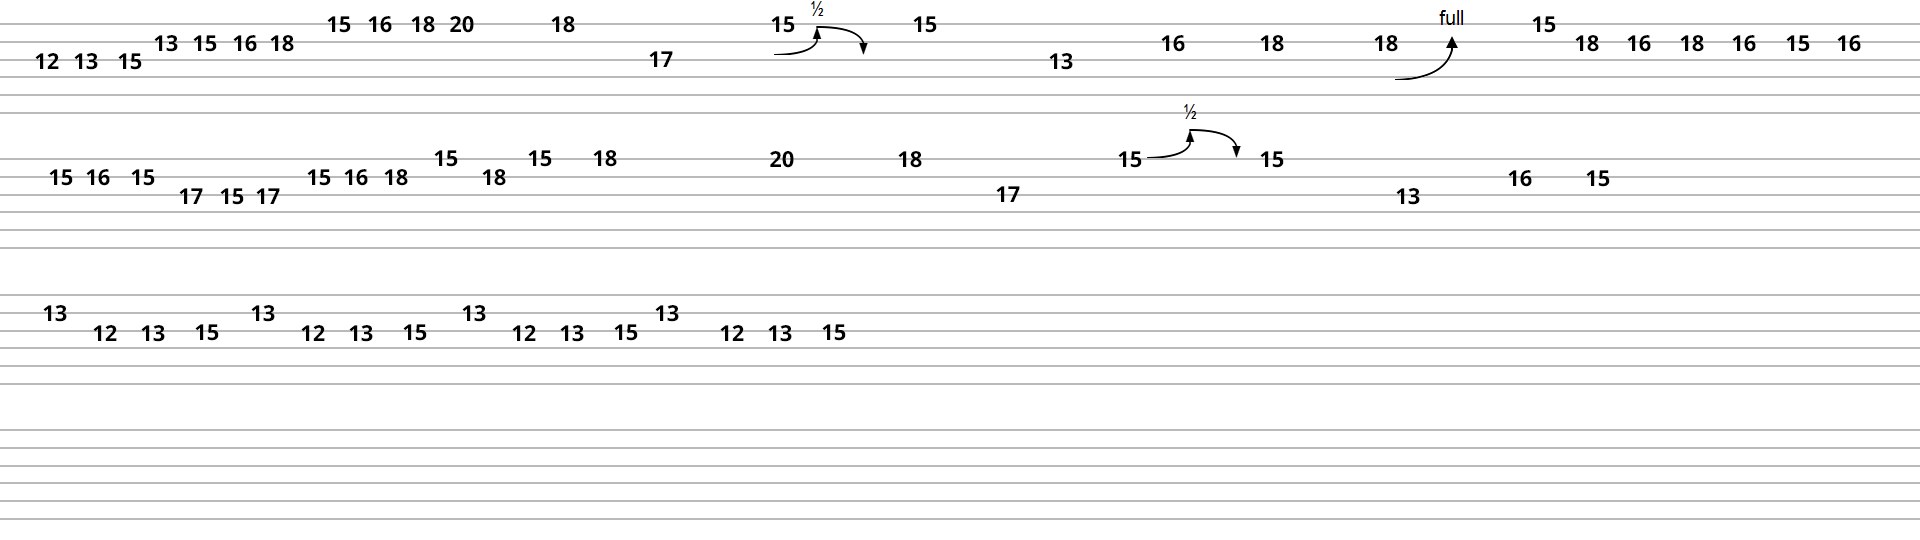 Gallery of Godfather Guitar Tabs.